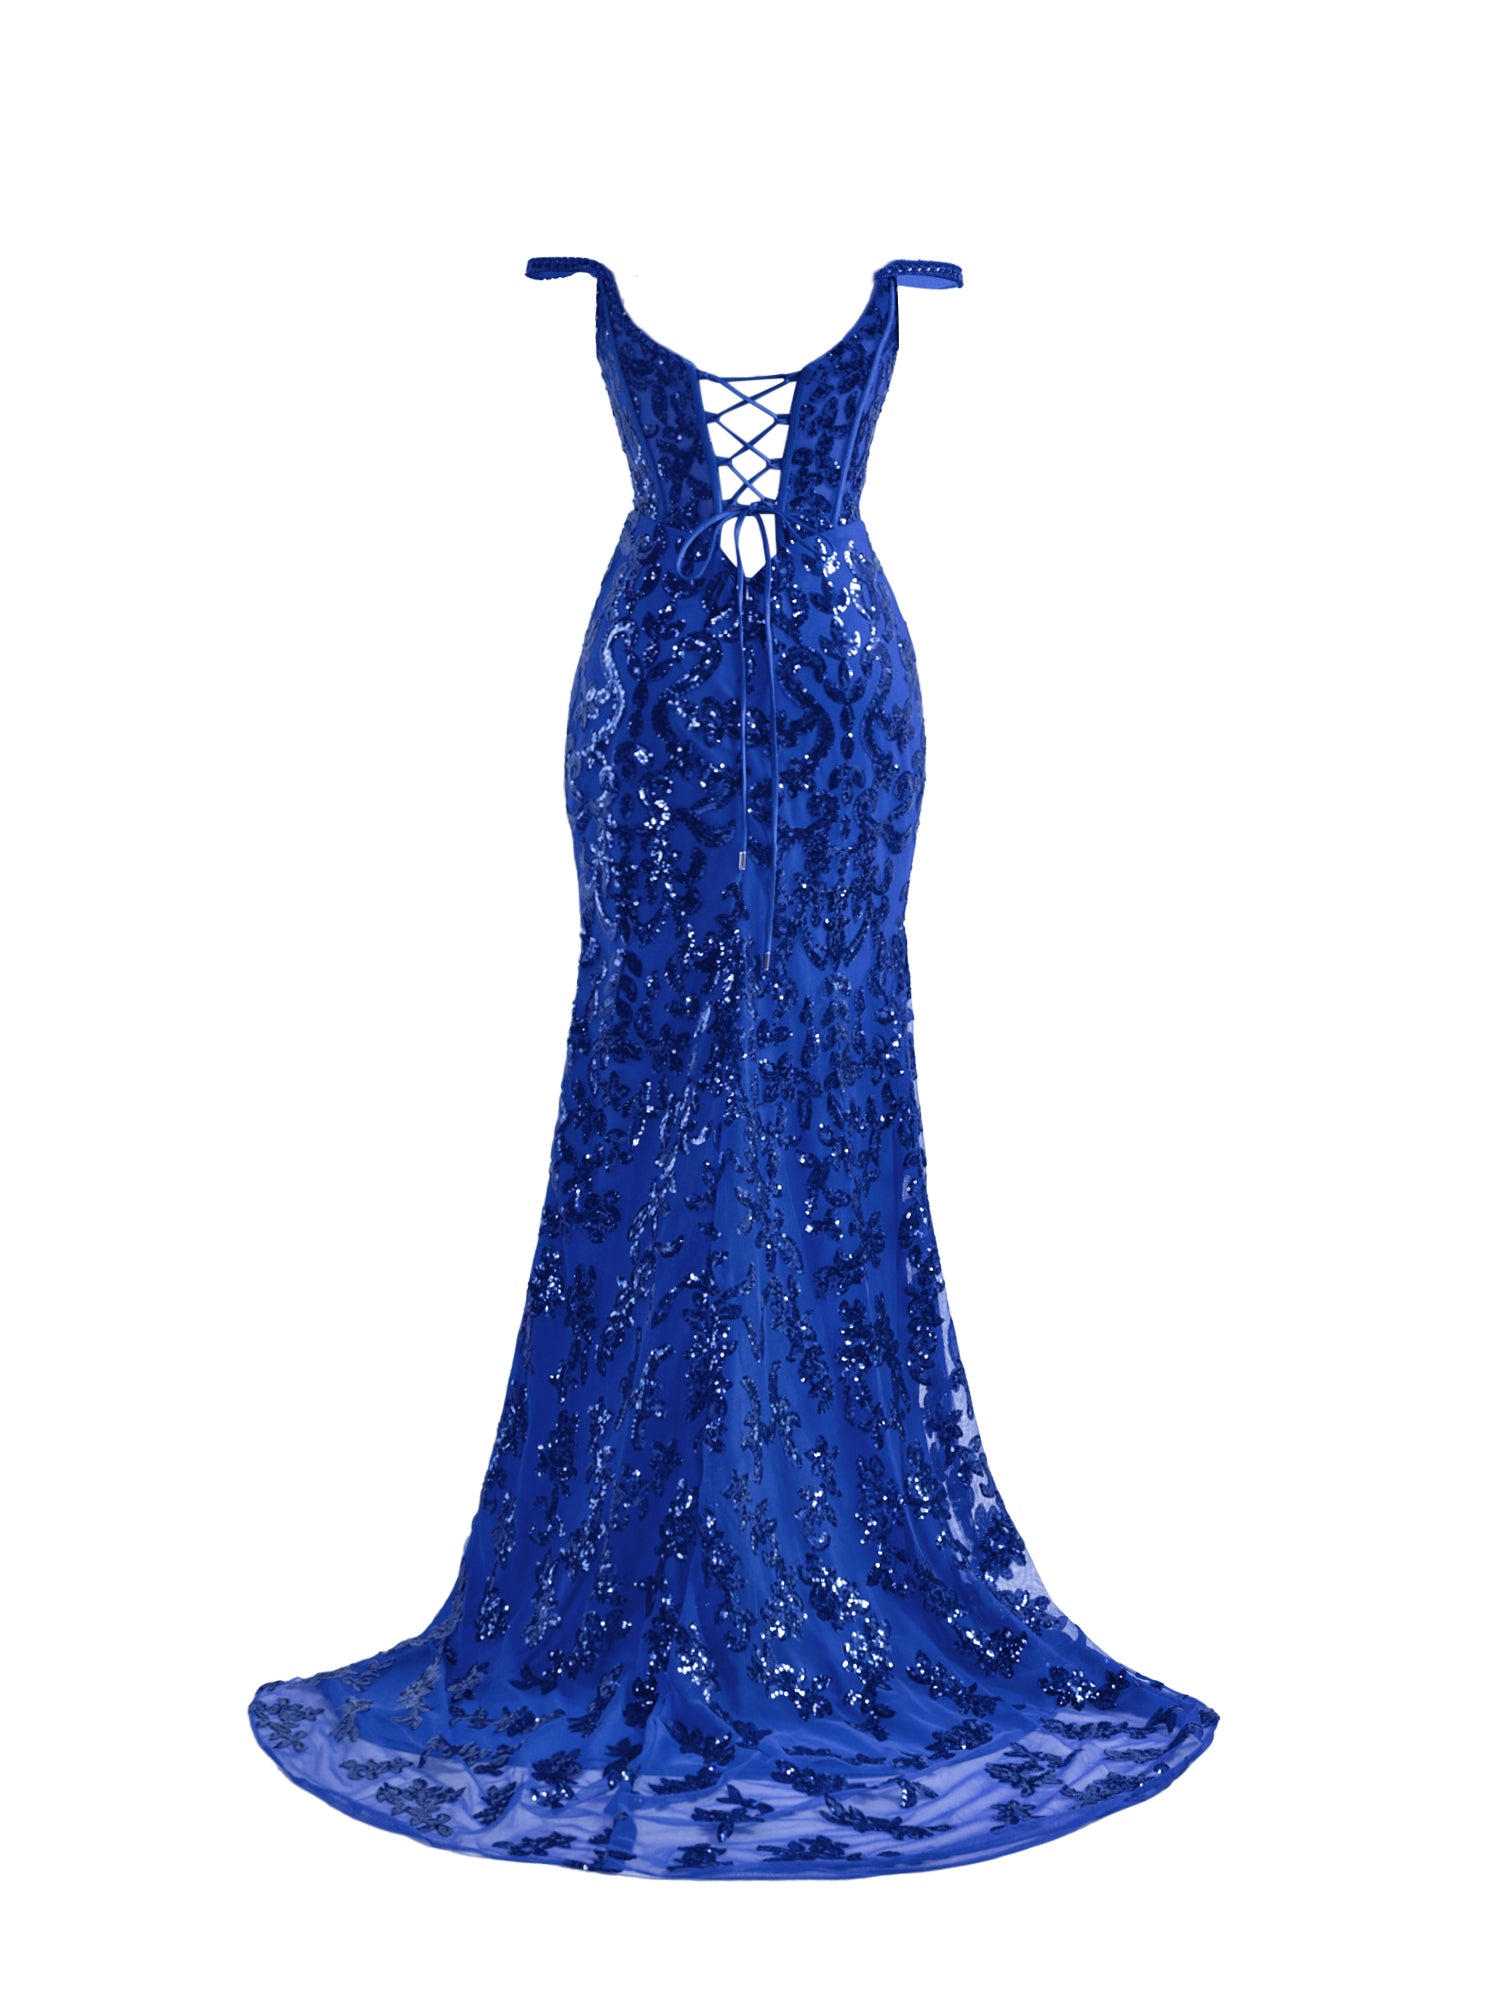 Erryn |Sparkly Blue Sheath Sequins Long Prom Dress with Slit